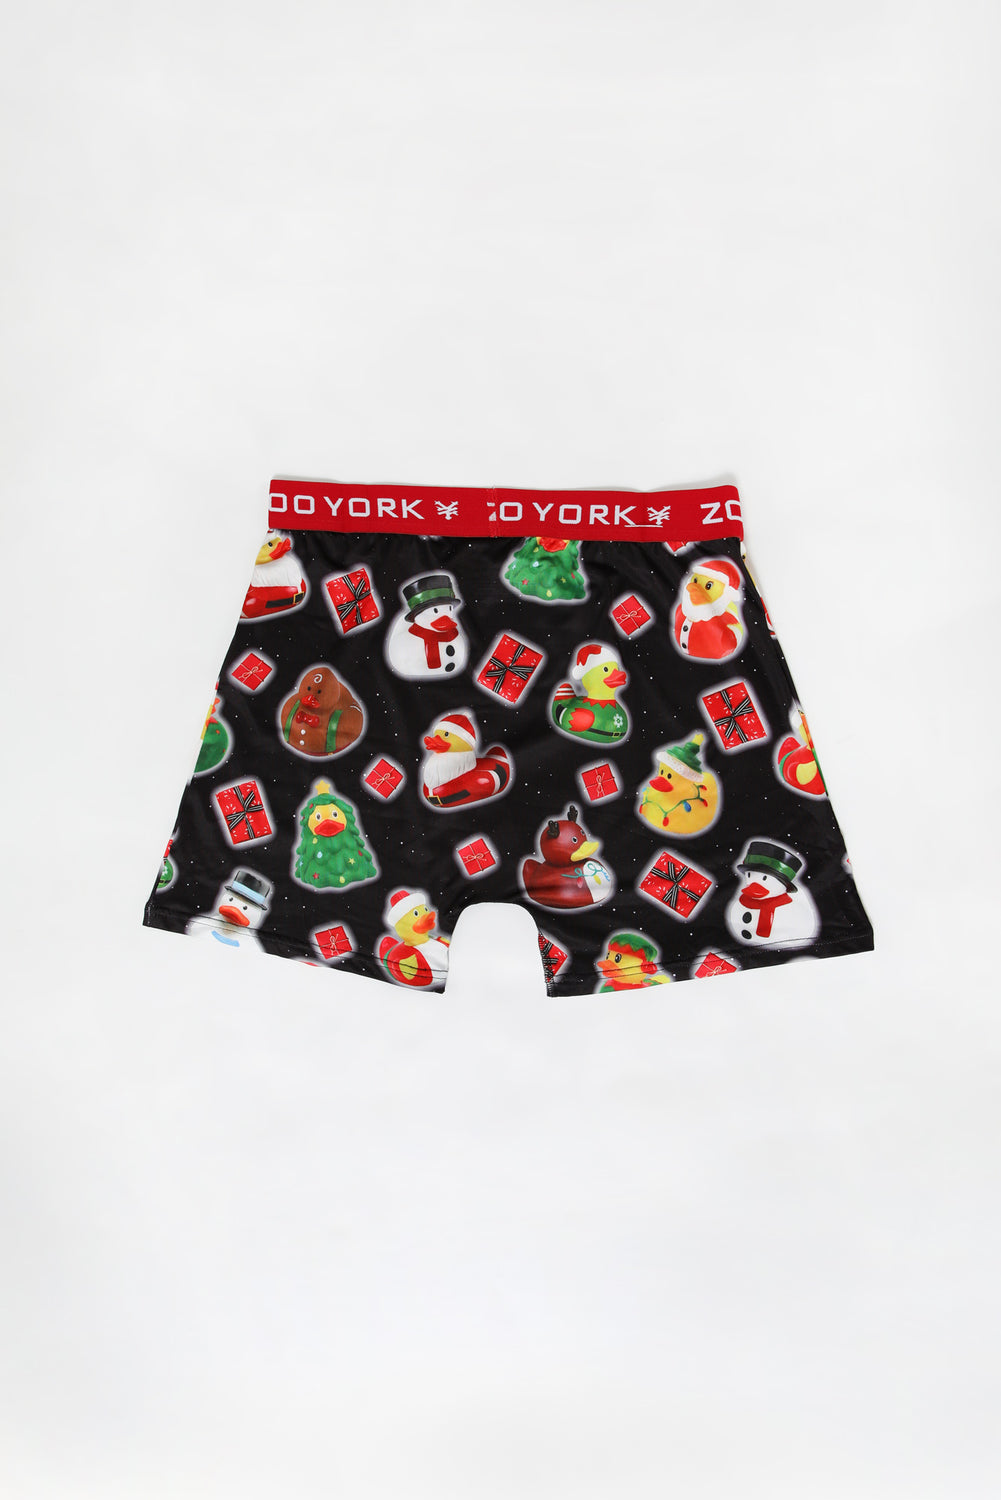 Zoo York Youth Xmas Rubber Duckies Boxer Brief Zoo York Youth Xmas Rubber Duckies Boxer Brief